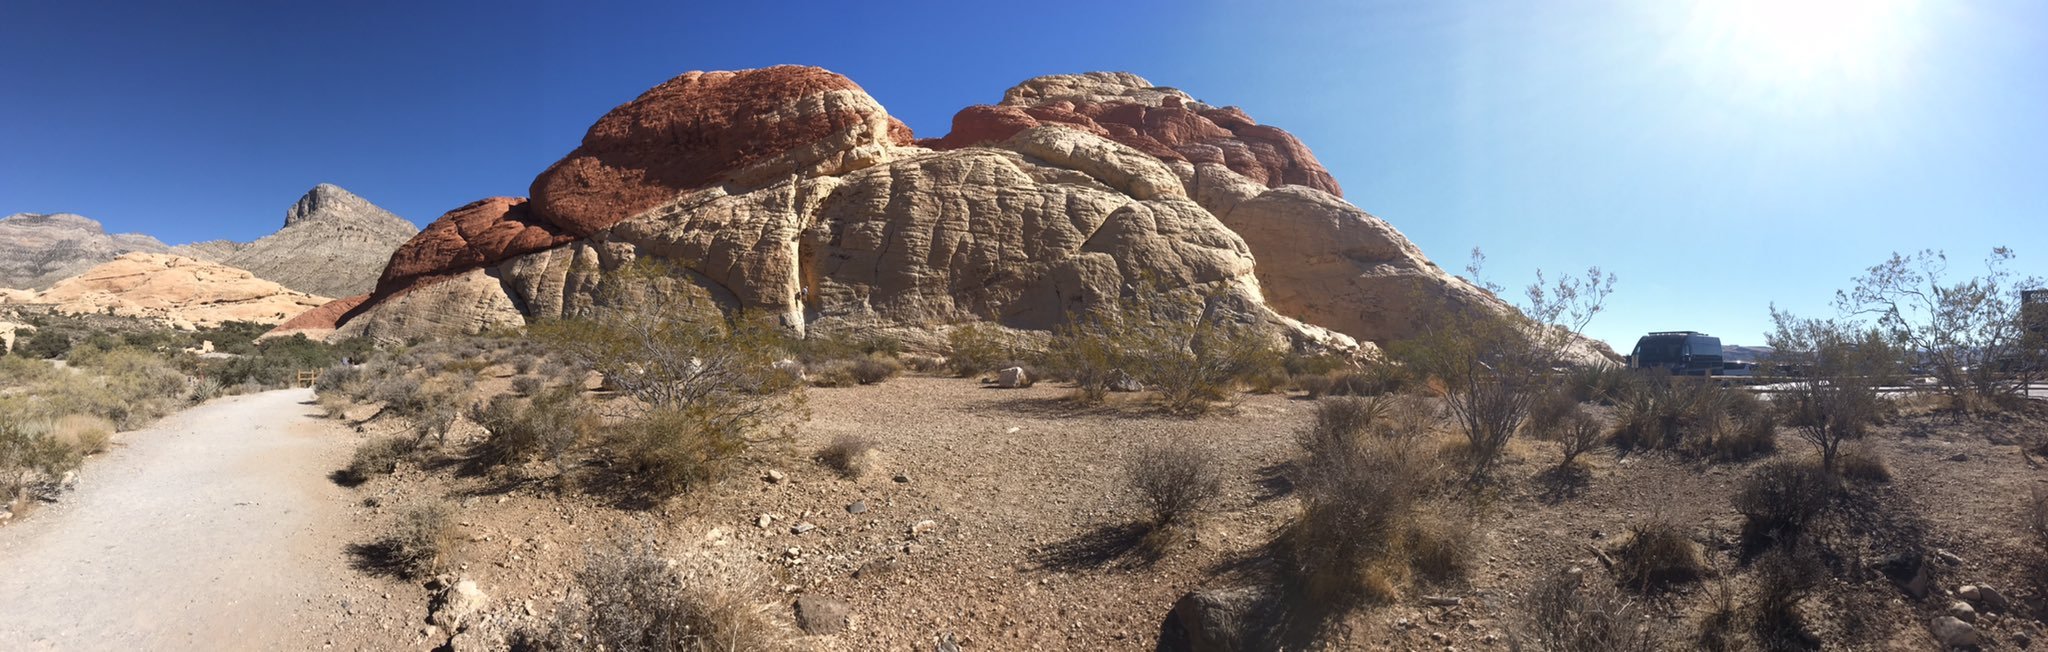 Panoramic photo of large red rock mountains in the desert